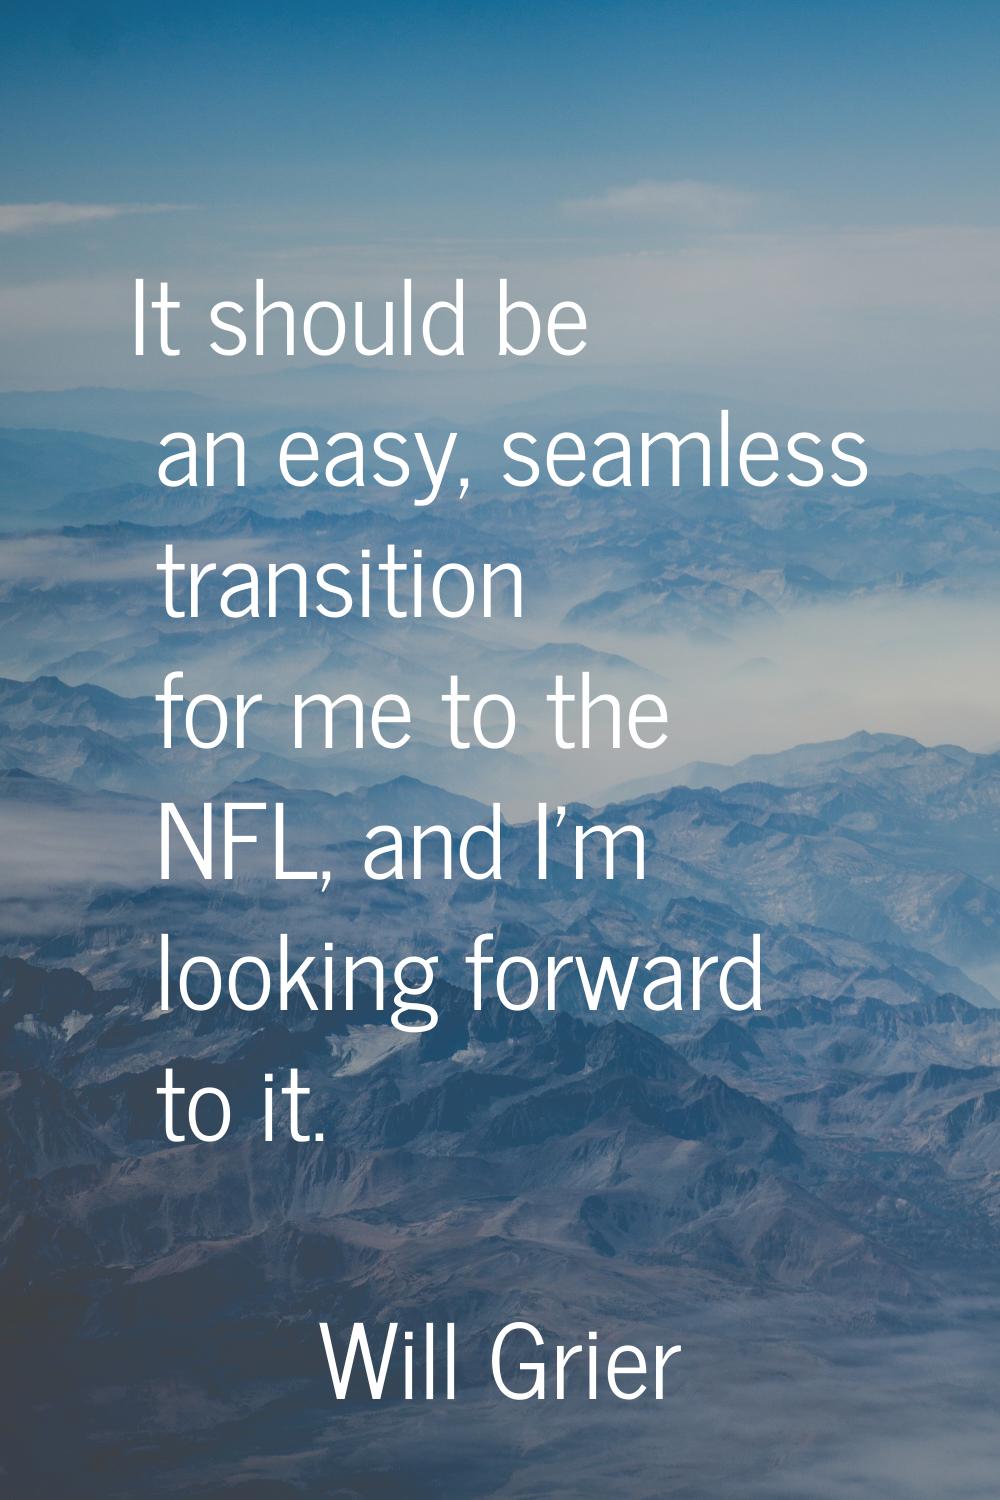 It should be an easy, seamless transition for me to the NFL, and I'm looking forward to it.